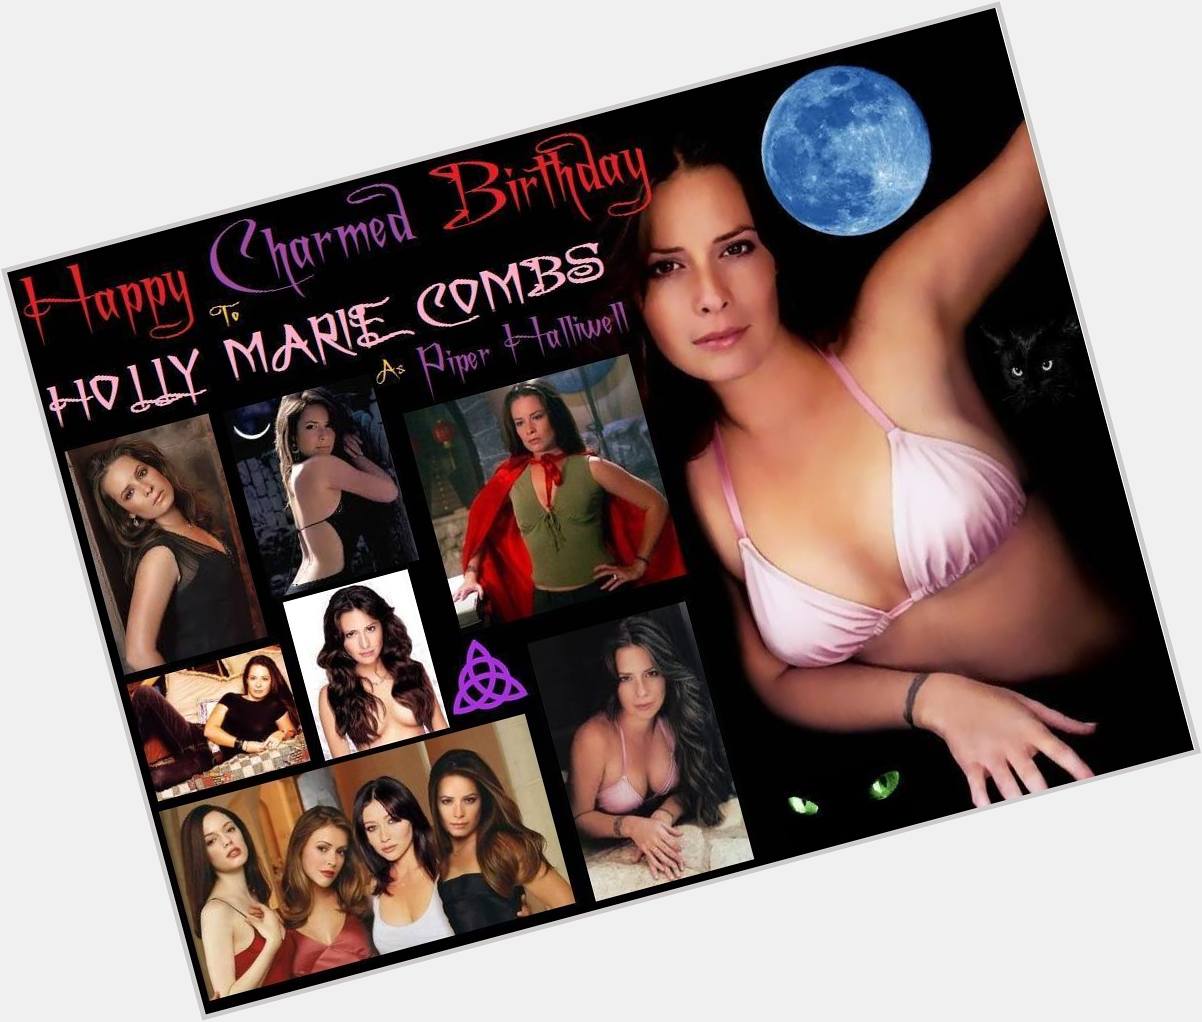 Happy birthday to Holly Marie Combs who was born December 3, 1973.  